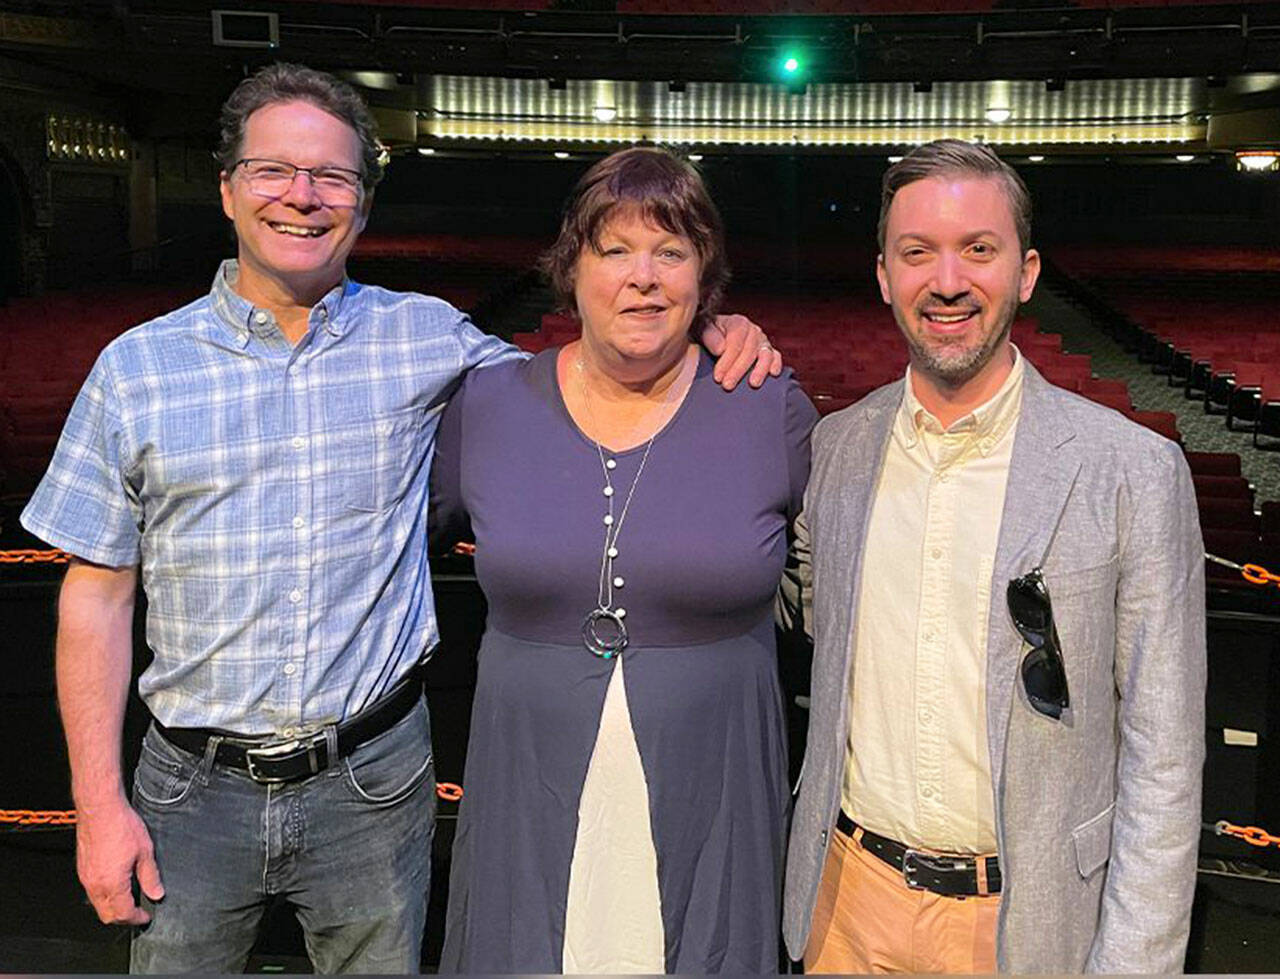 High school drama teachers Jay Thornton, of Kent-Meridian; Jennifer Grajewski, of Kentridge; and Zachary Chaykin, of Kentlake, at the 5th Avenue Theatre awards event in Seattle. Kentwood’s Chad Taylor was unable to attend. COURTESY PHOTO, Kent School District